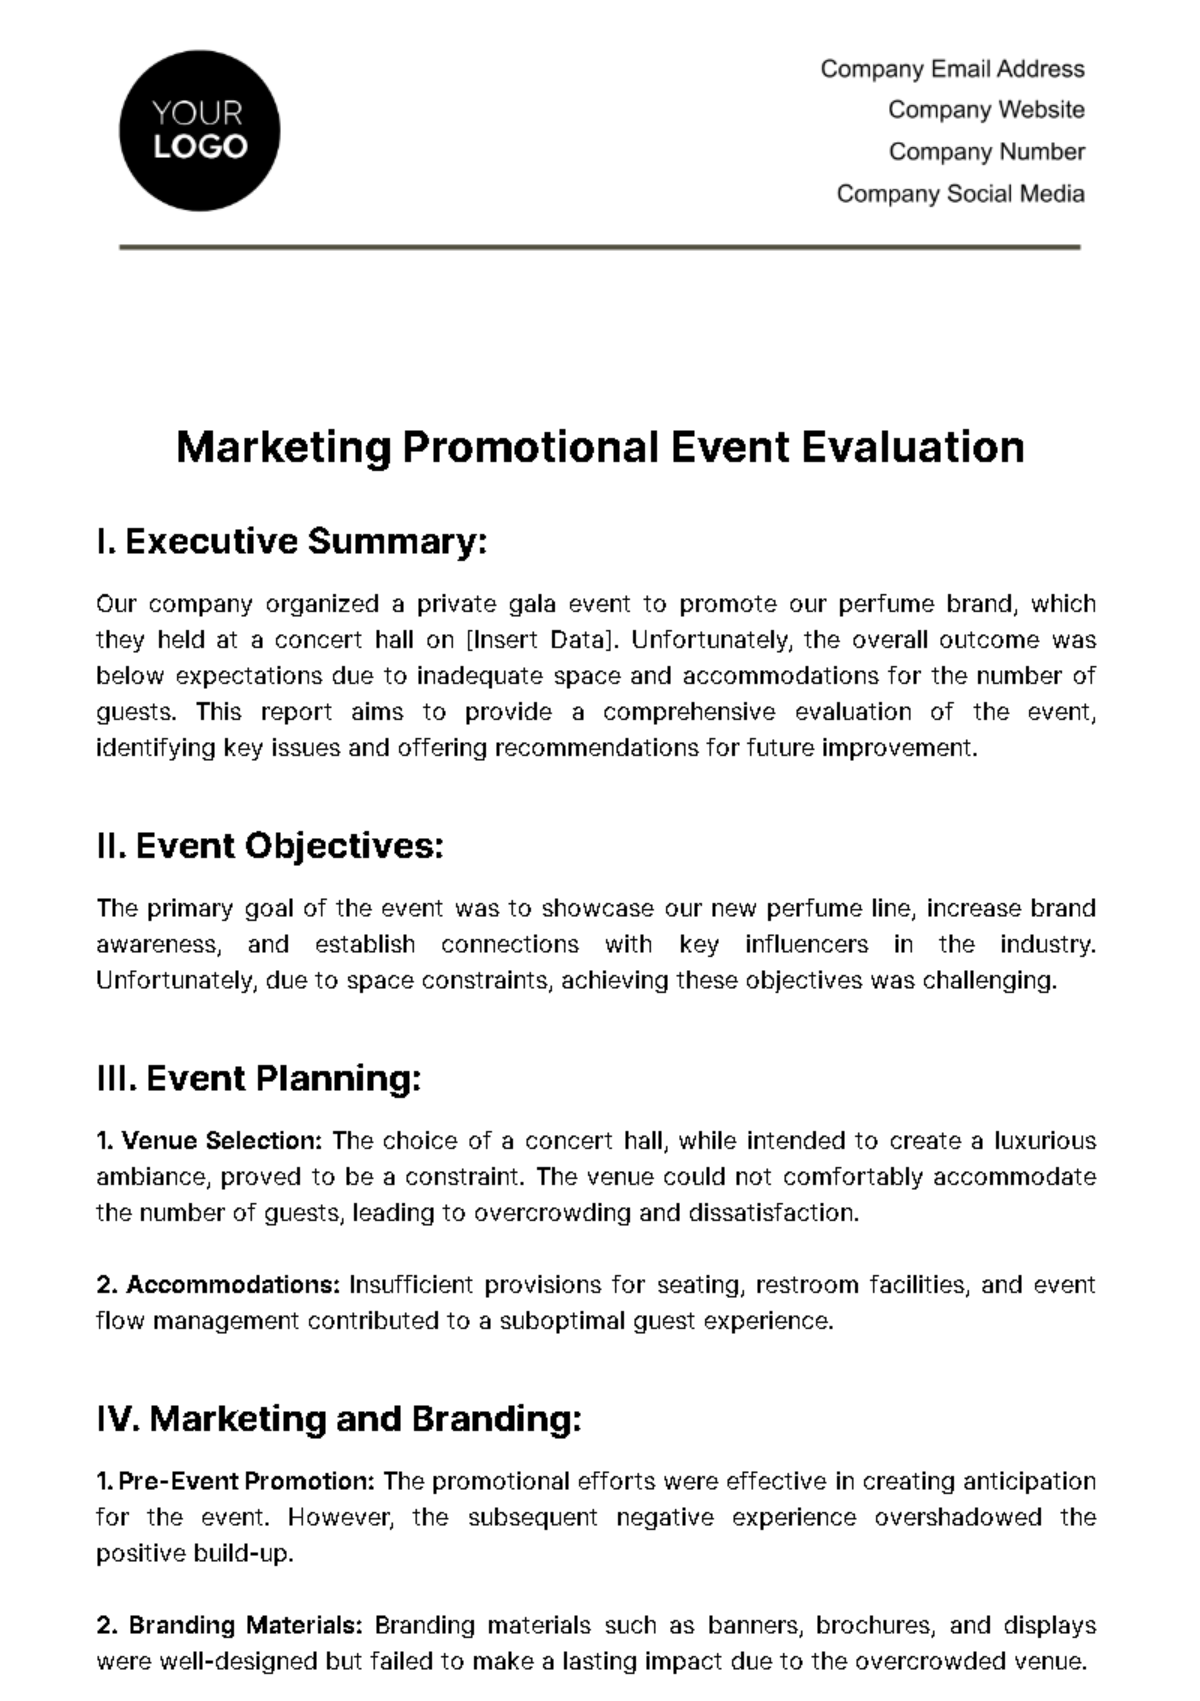 Free Marketing Promotional Event Evaluation Template